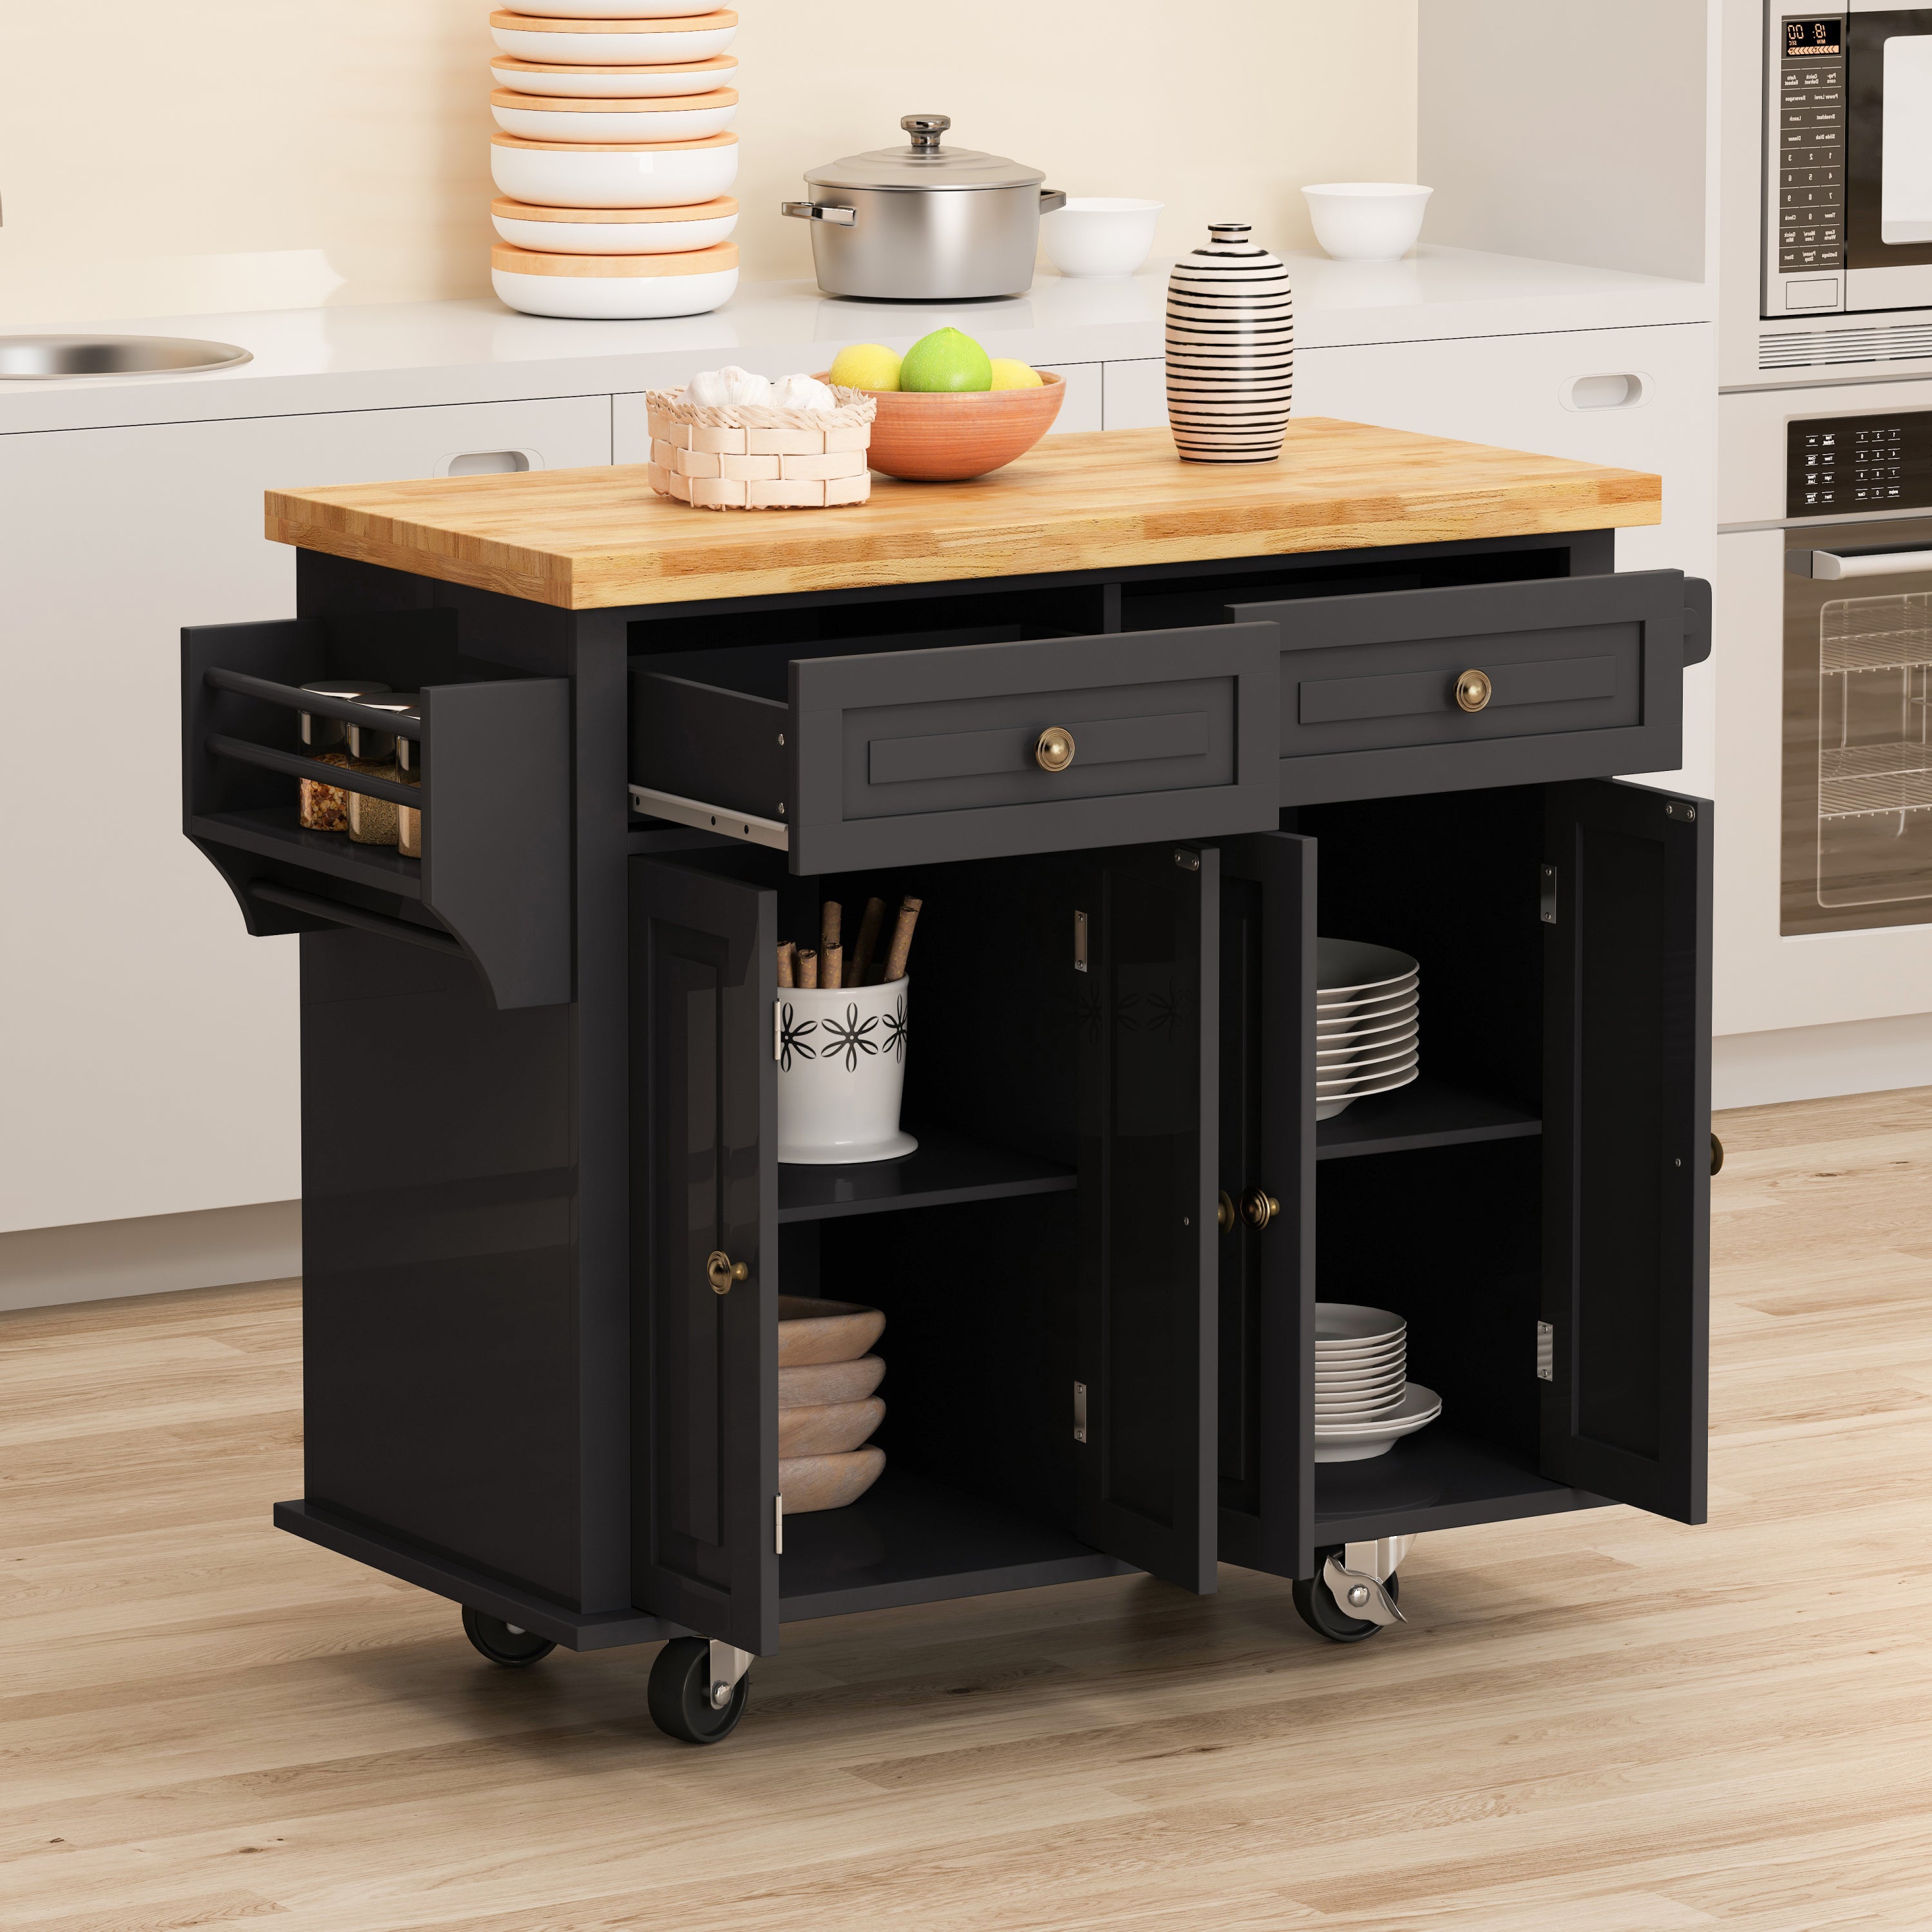 🆓🚛 Kitchen Island Cart With Two Storage Cabinets and Two Locking Wheels, 43.31" Width, 4 Door Cabinet and Two Drawers, Spice Rack, Towel Rack, Black